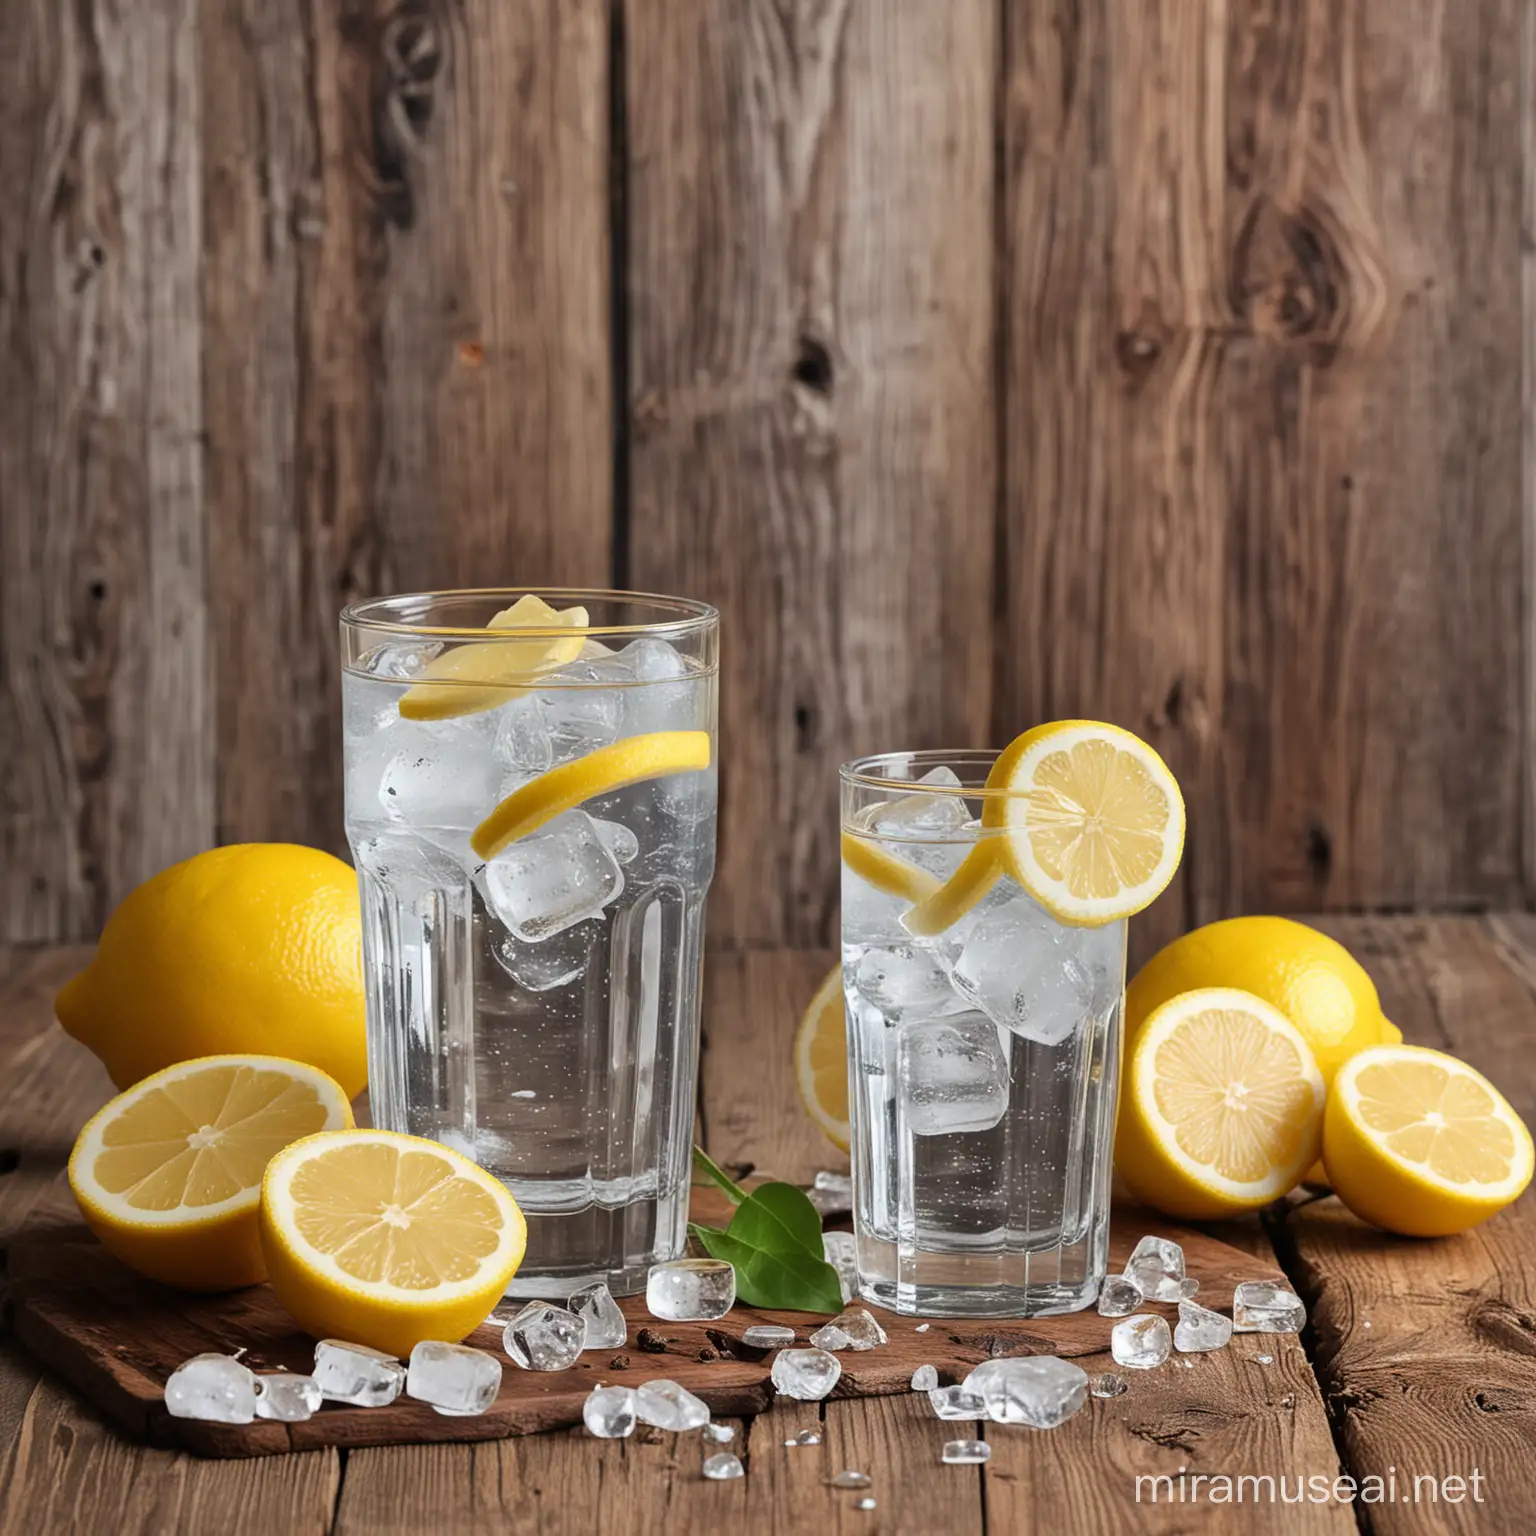 Refreshing Mineral Water with Ice and Lemon on Rustic Wooden Table Against Wooden Wall